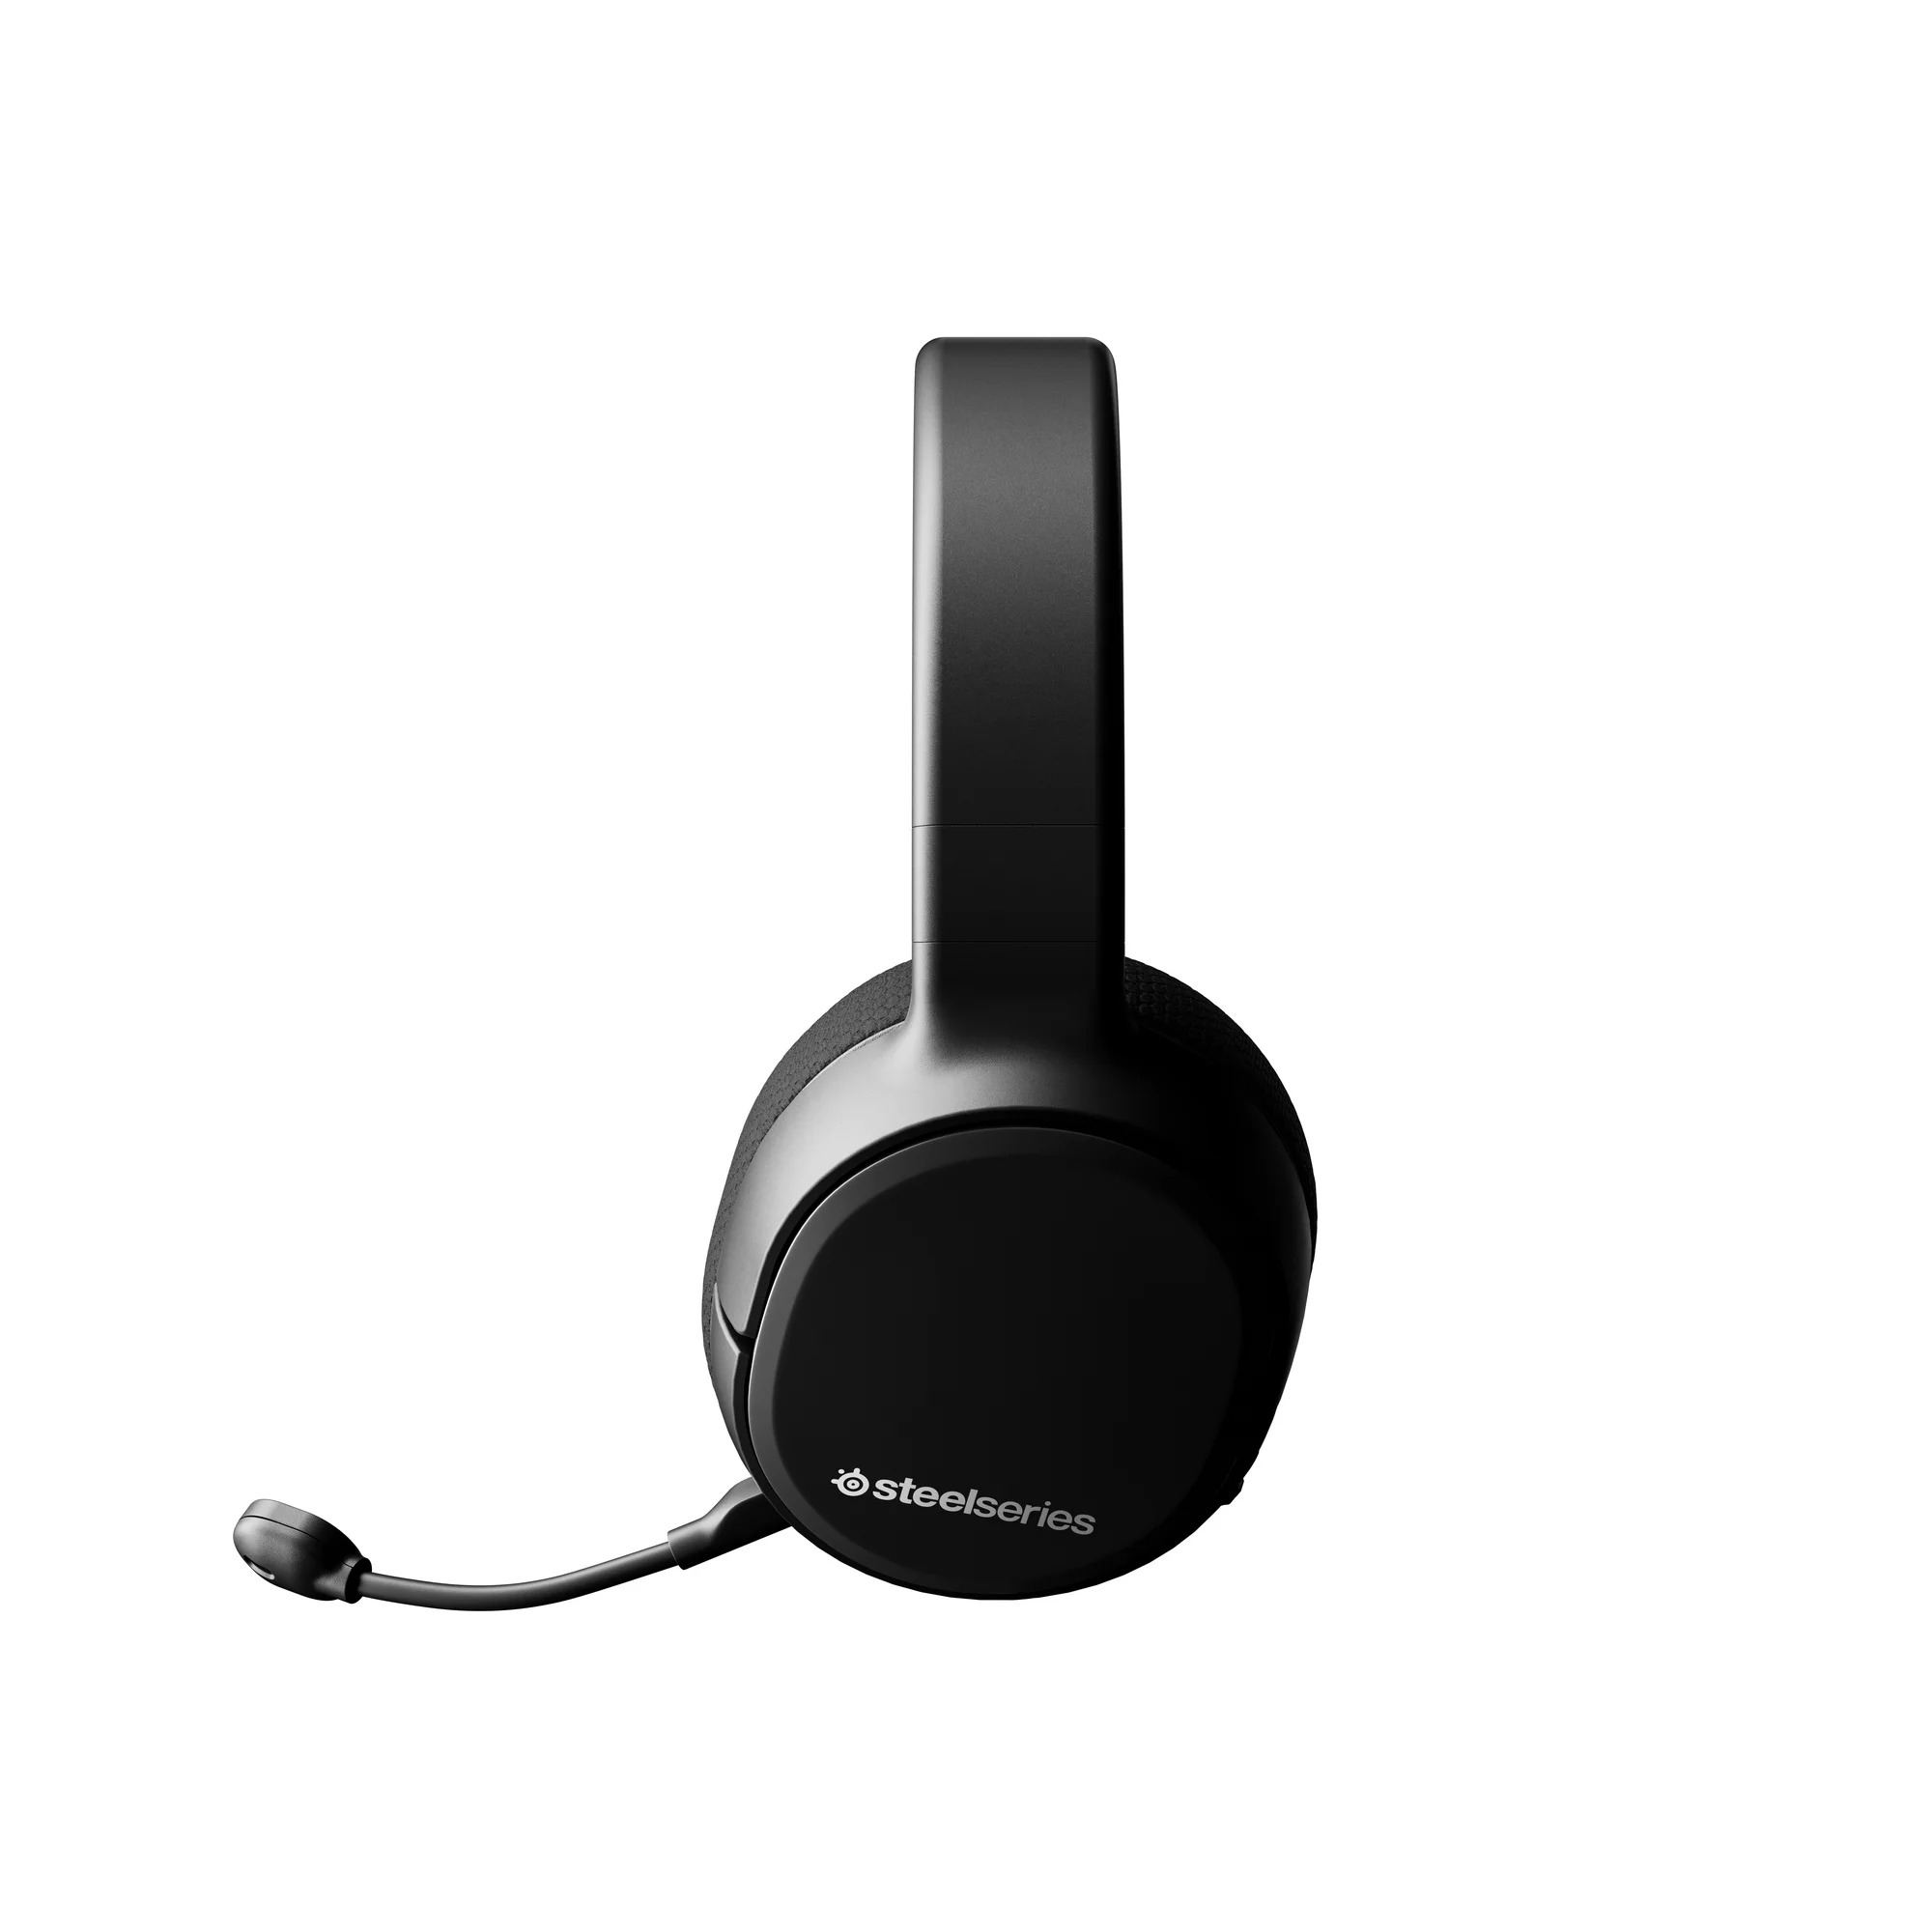 SteelSeries Arctis 1 Wireless Gaming Headset $49 + Free Shipping